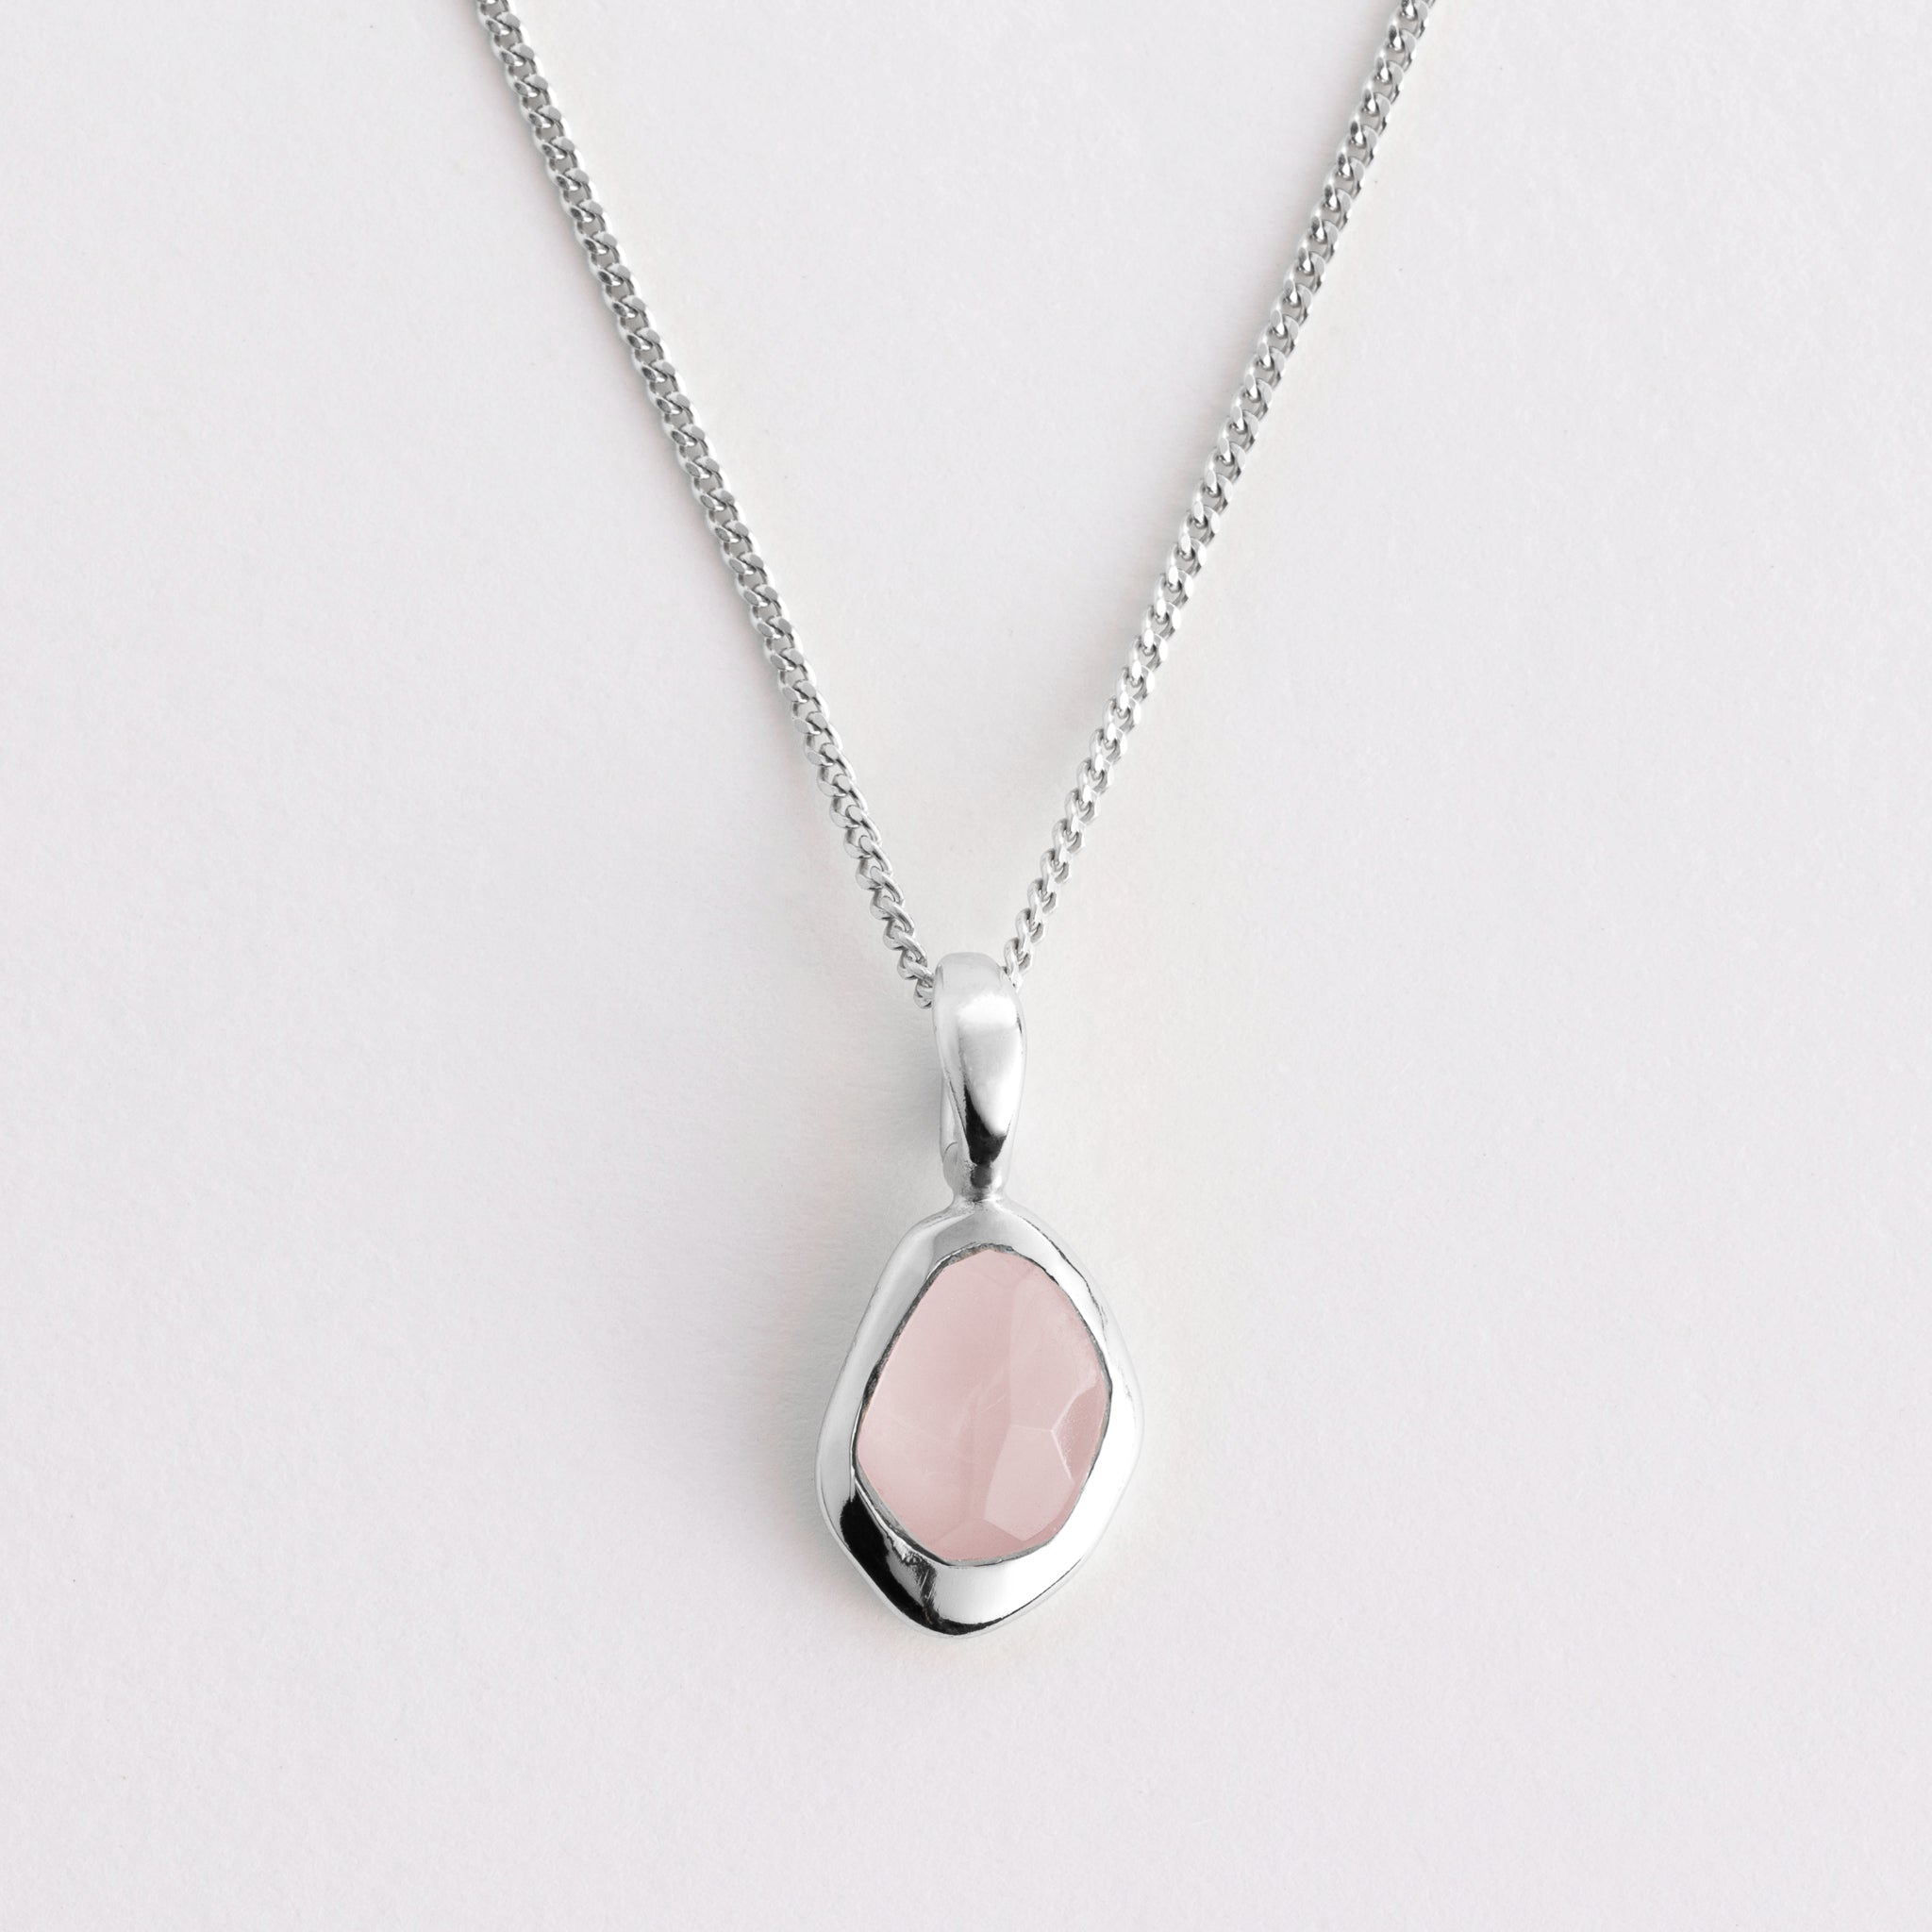 Pendant features a sparkling, handcut natural gemstone and is crafted from sterling silver or 18ct gold vermeil.